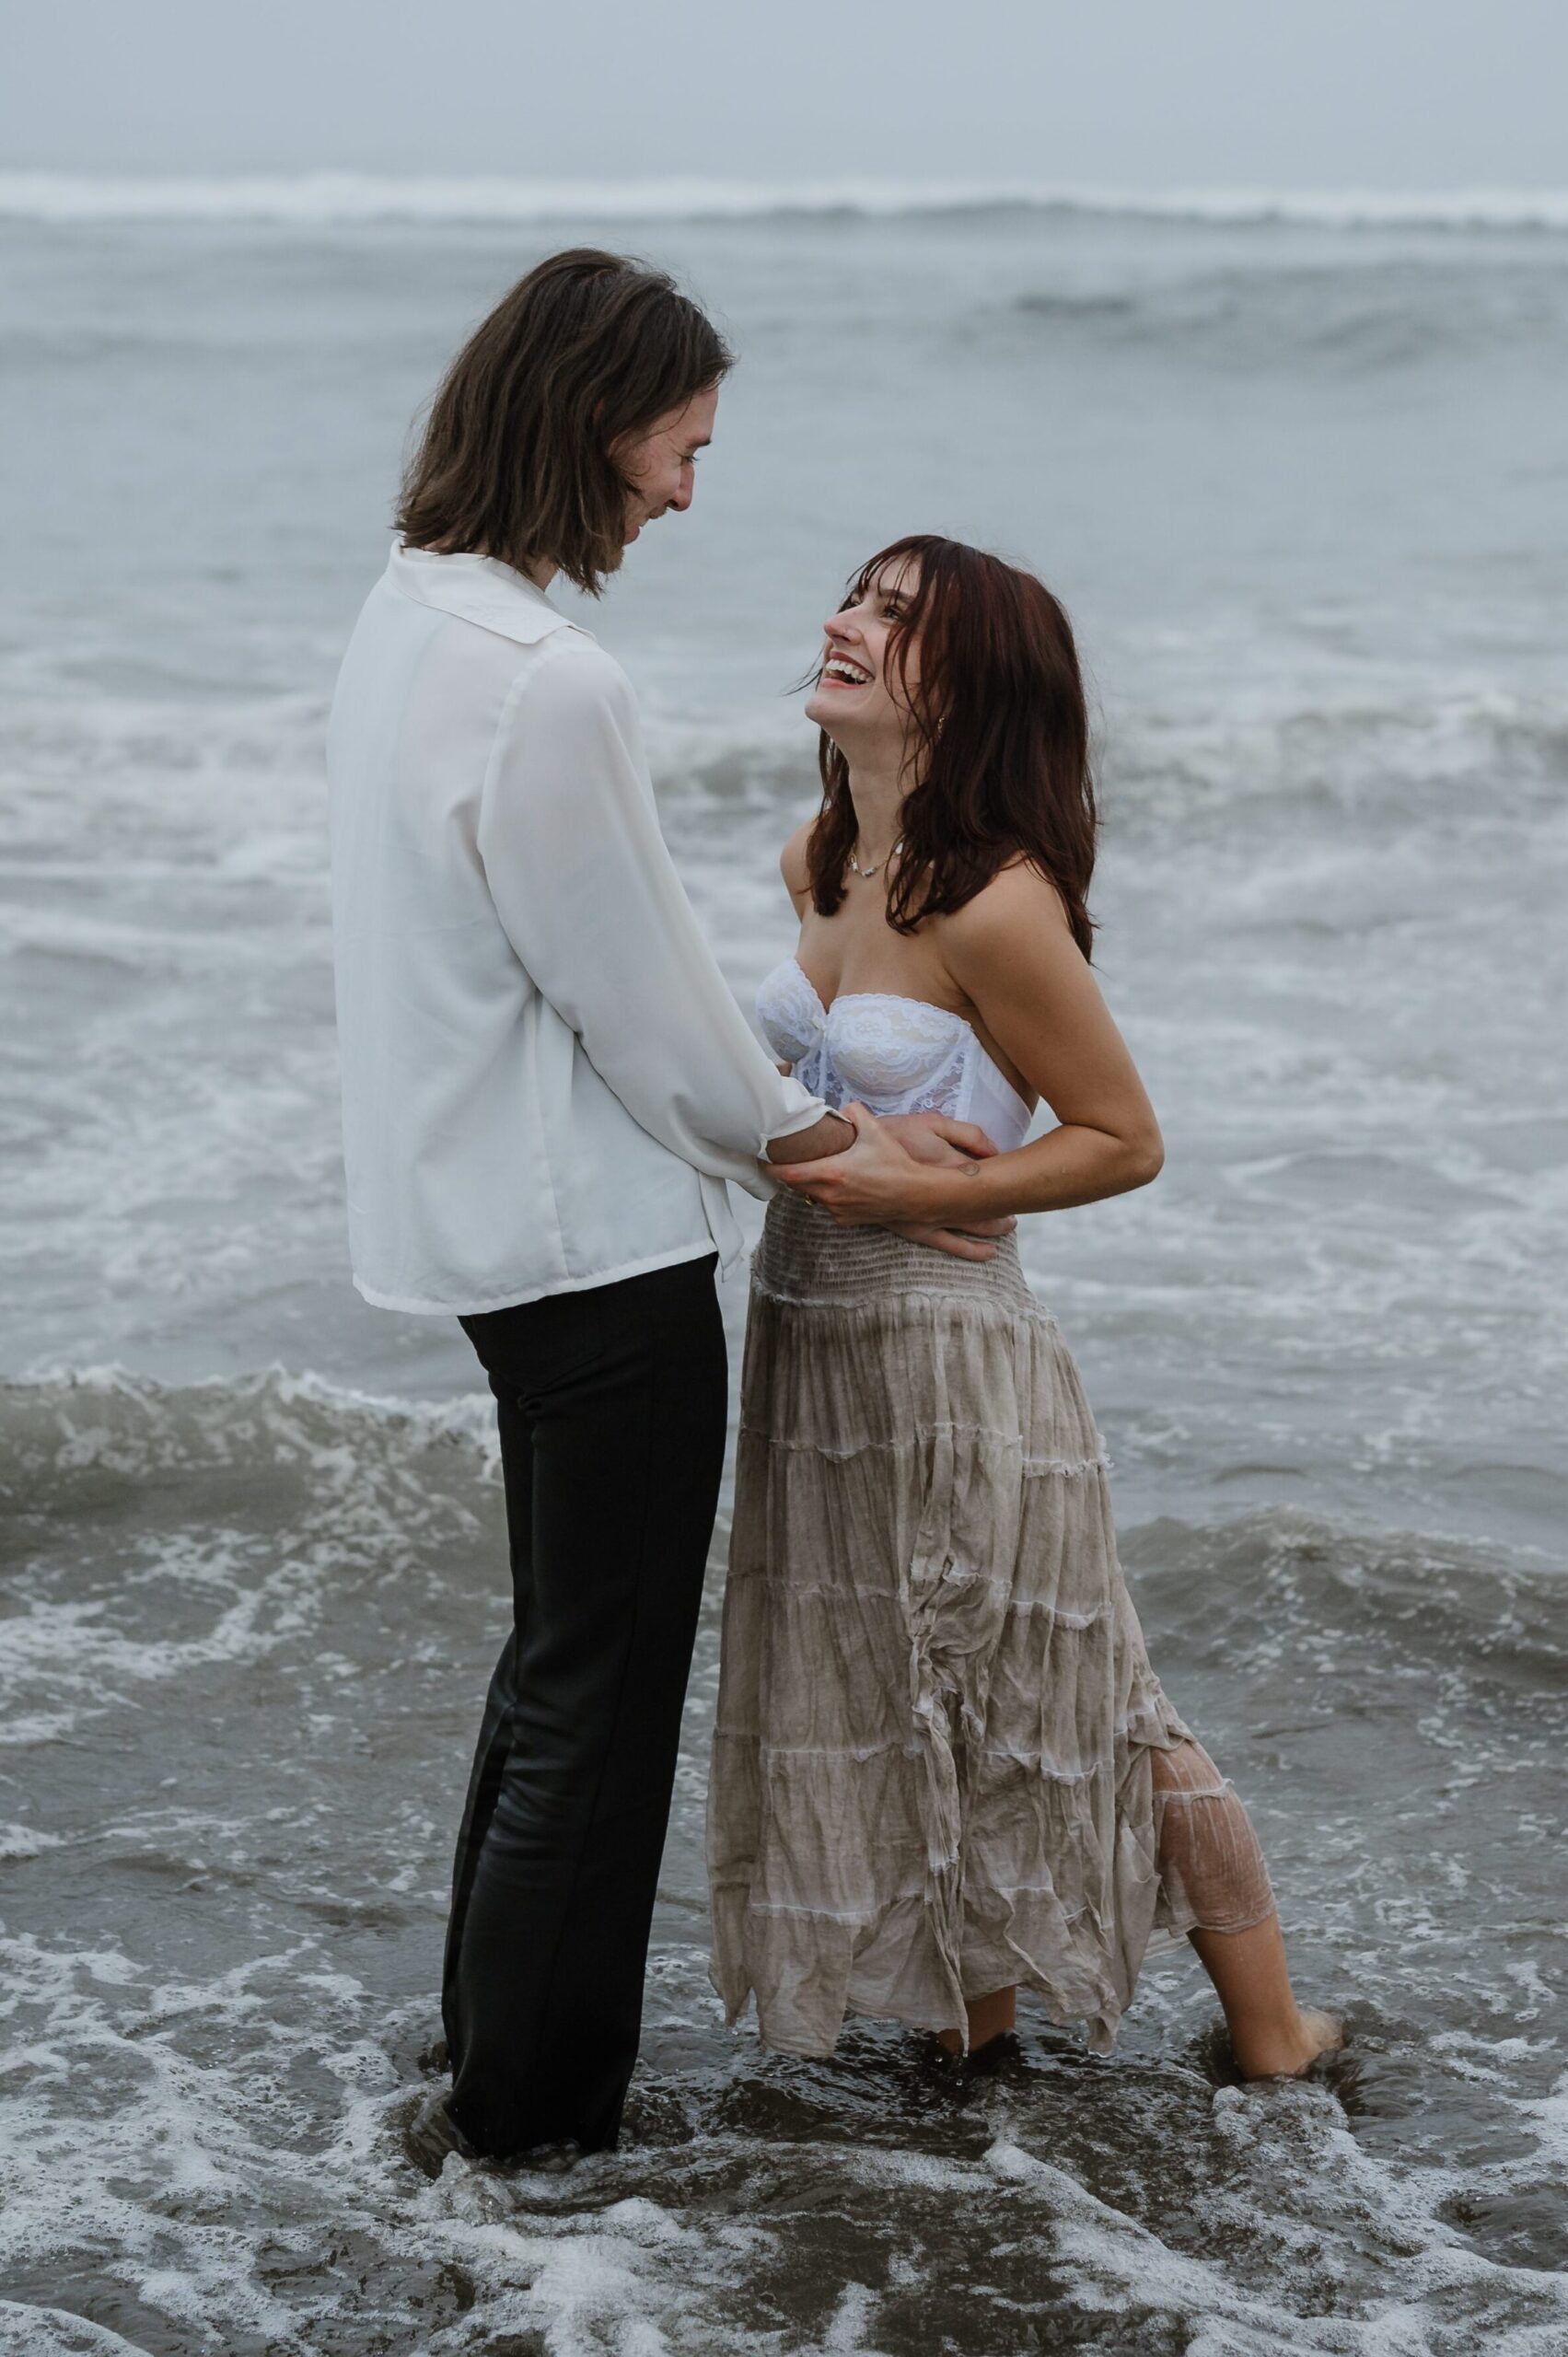 A couple sharing a joyful moment standing in the ocean waves.